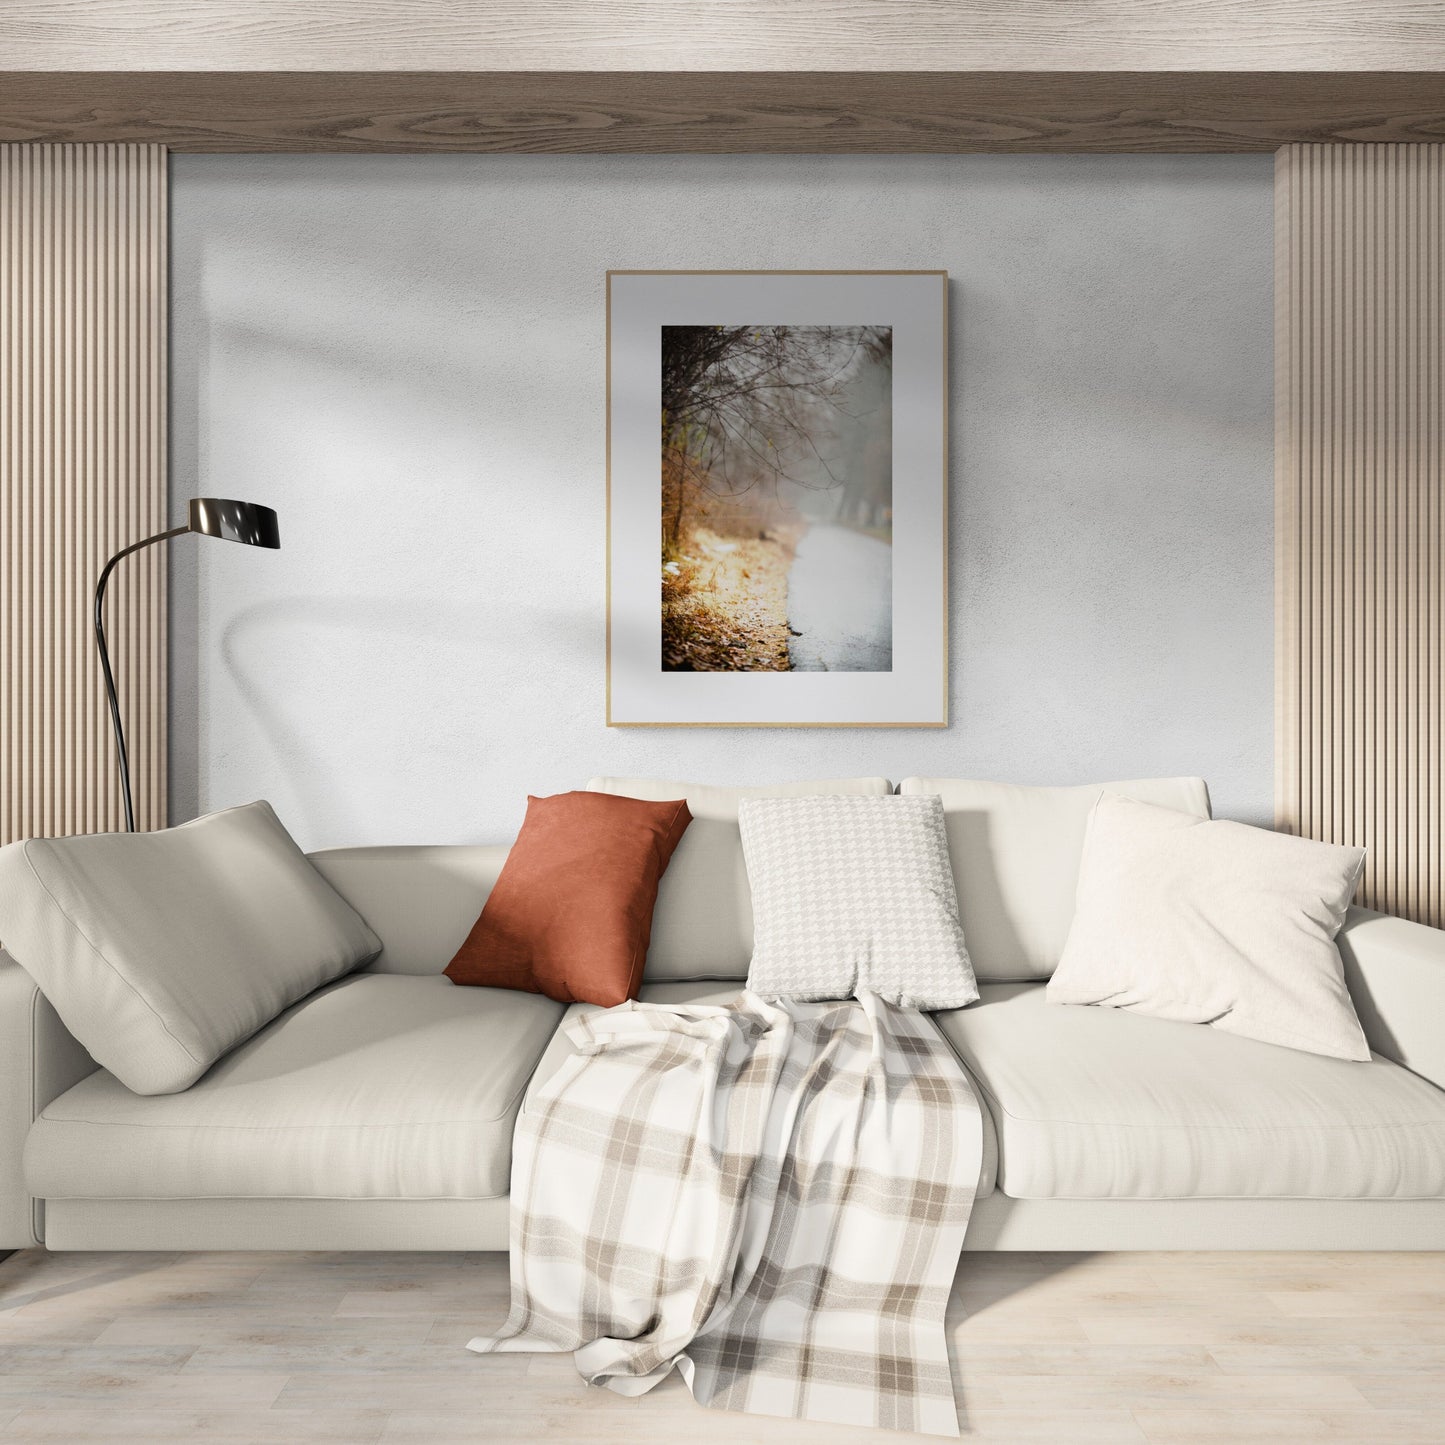 Foggy Bare Road Photograph in Winter in a Living Room as Wall Art